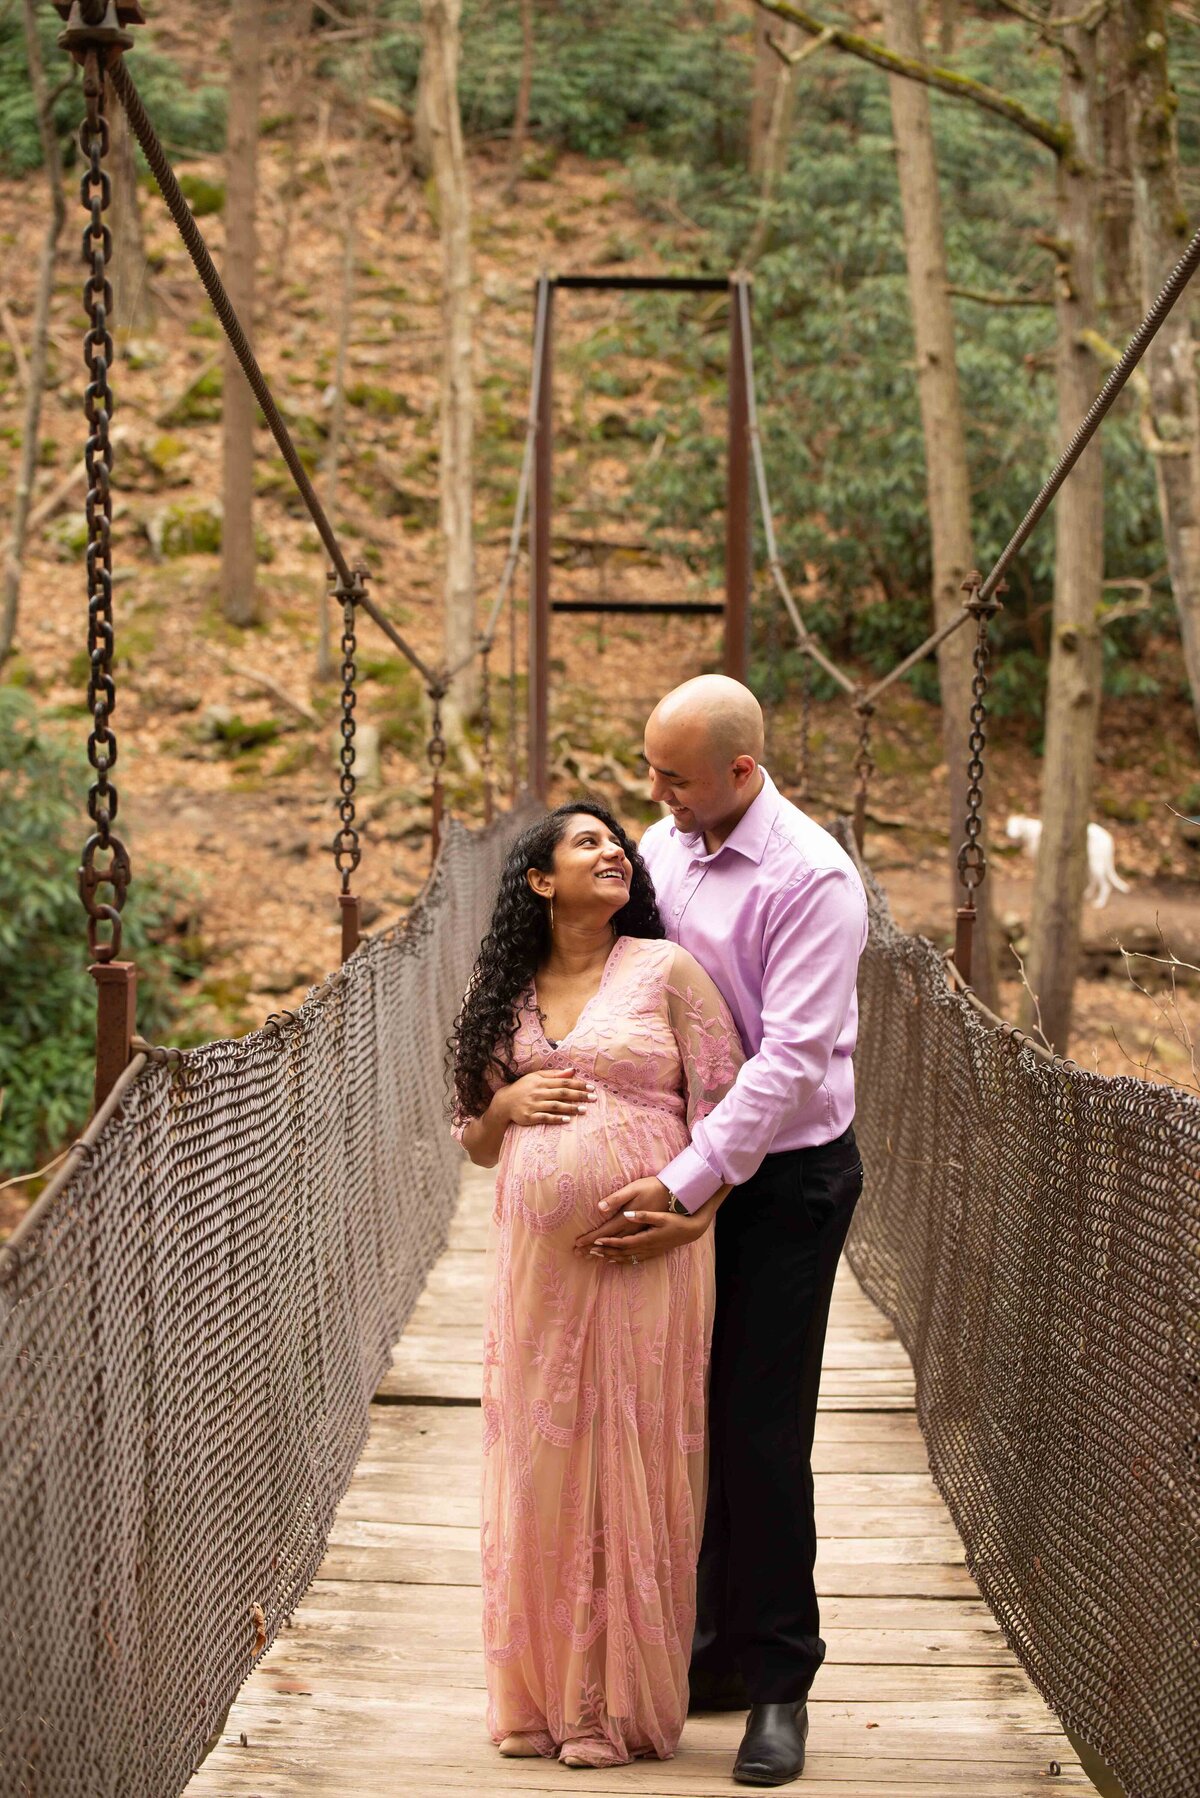 A couple stands on a bridge, with the man standing behind a pregnant woman, holding her baby bump